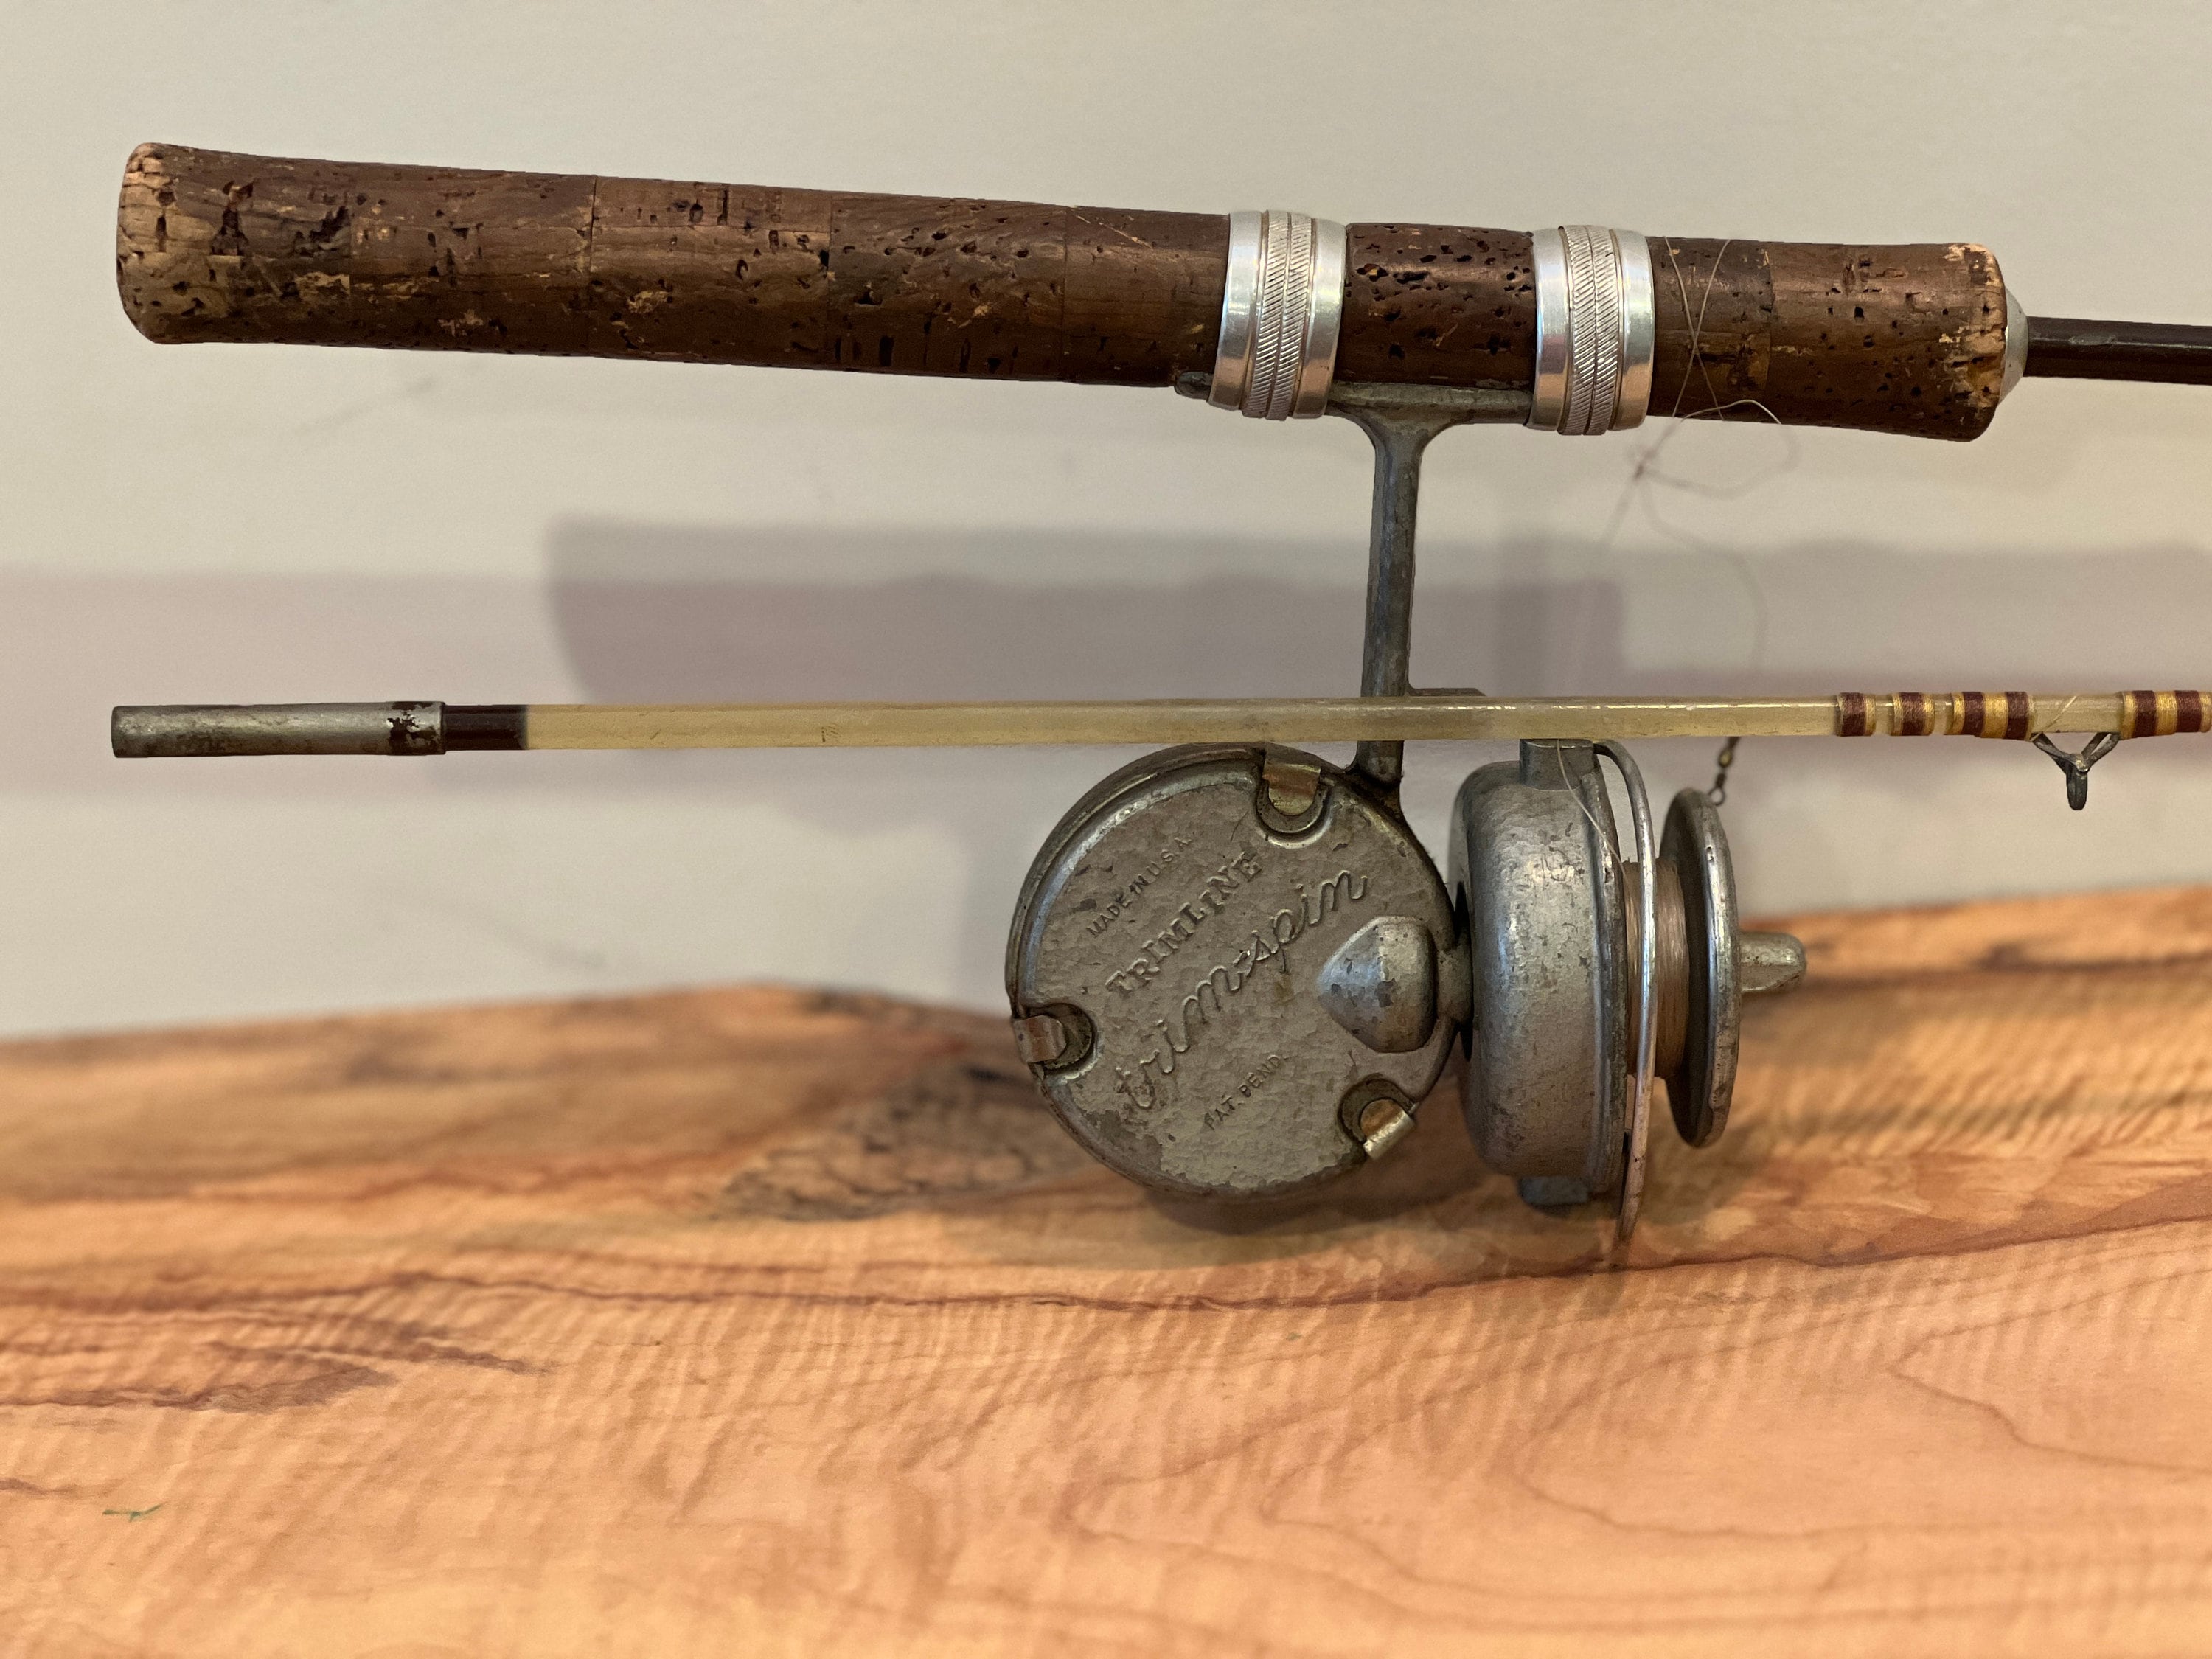 Vintage 1950s Trimline Trim-spin Reel and Great Lakes Solid